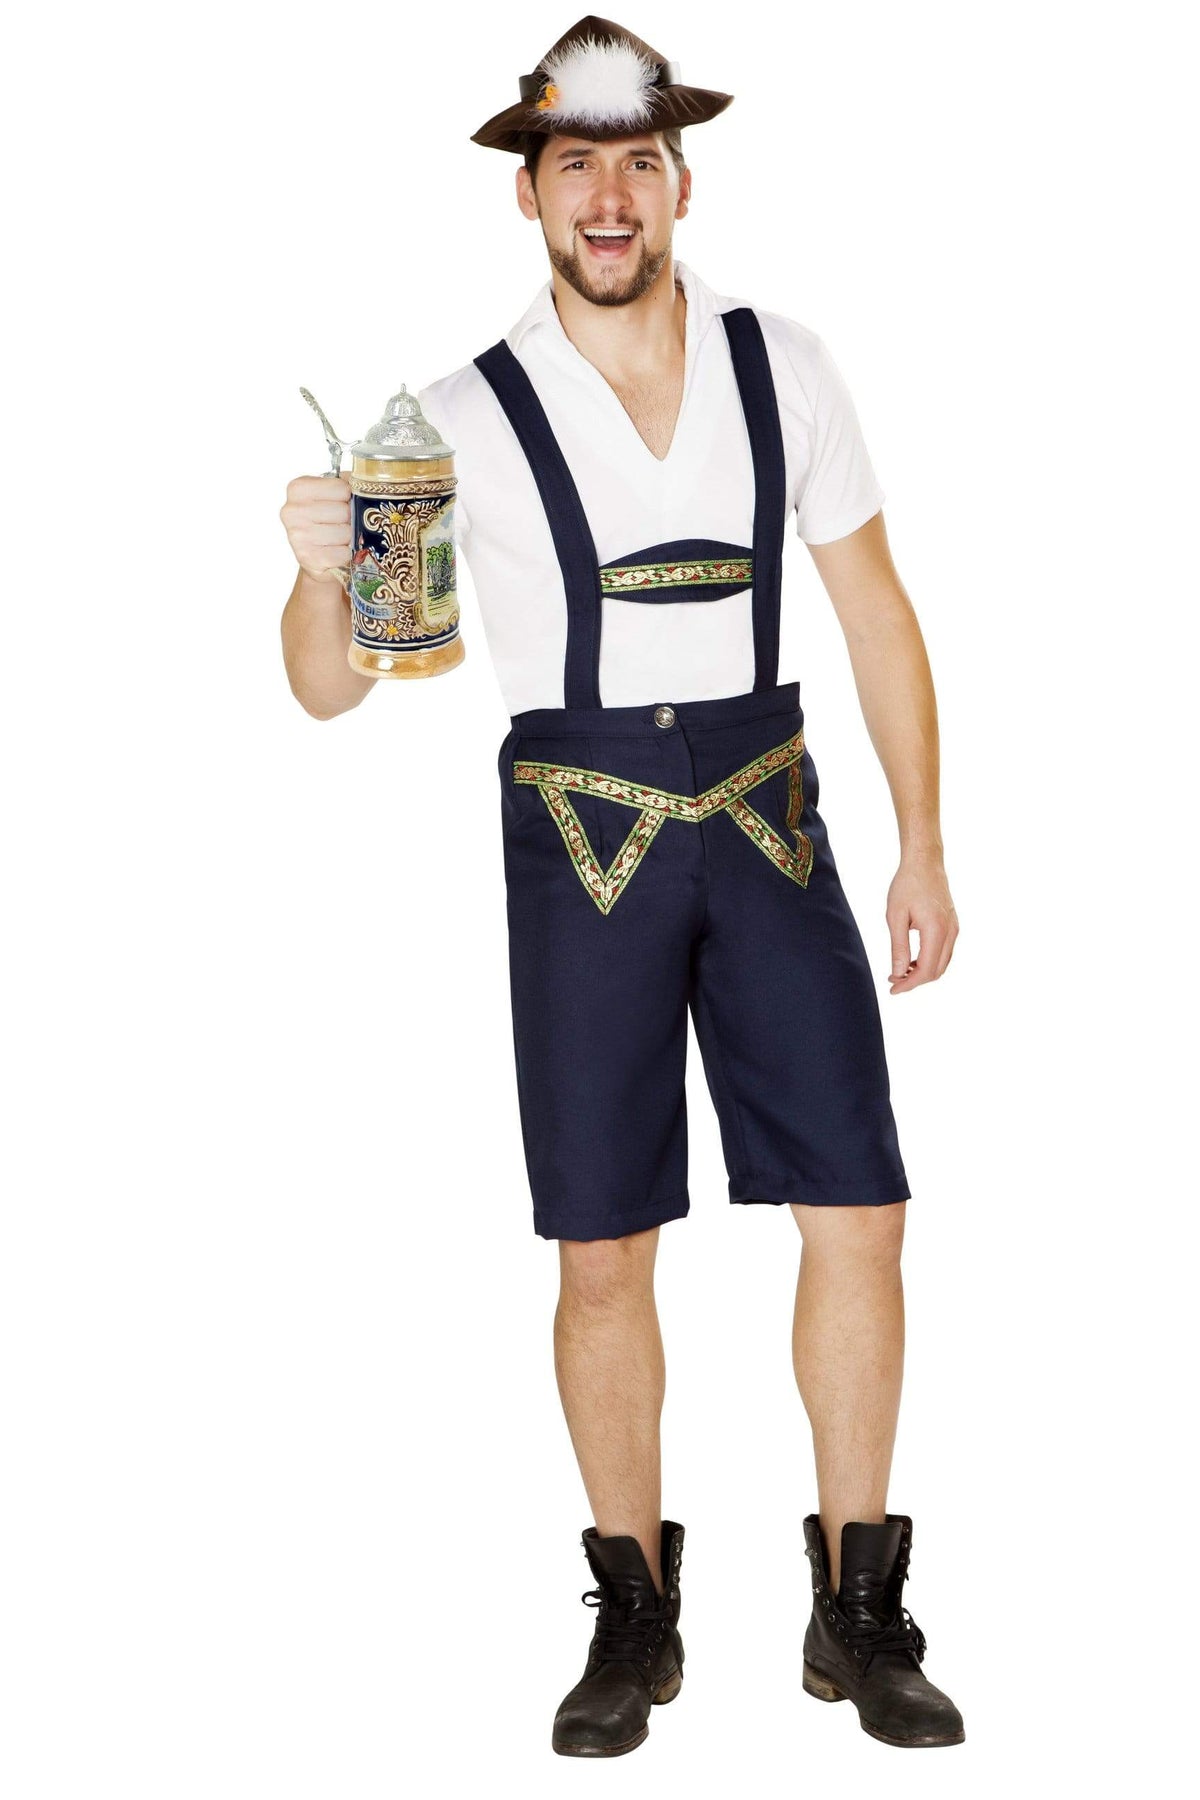 Roma Small / Blue 3pc Oktoberfest Beer Bud SHC-4885-S-R Apparel &amp; Accessories &gt; Costumes &amp; Accessories &gt; Costumes